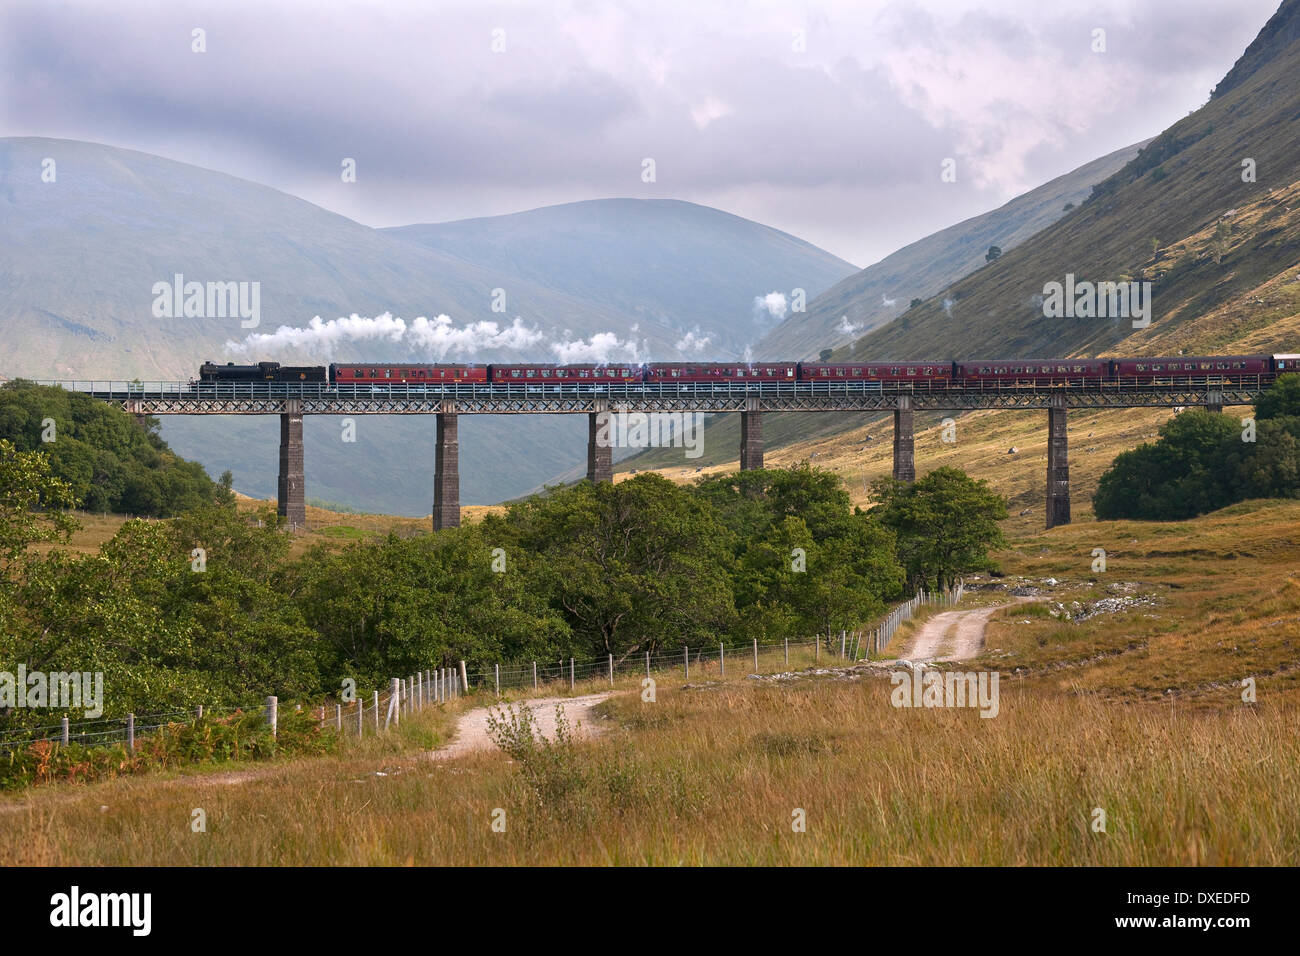 Great Marquess seen crossing the Horseshoe viaduct, Auch, Nr Tyndrum. Stock Photo